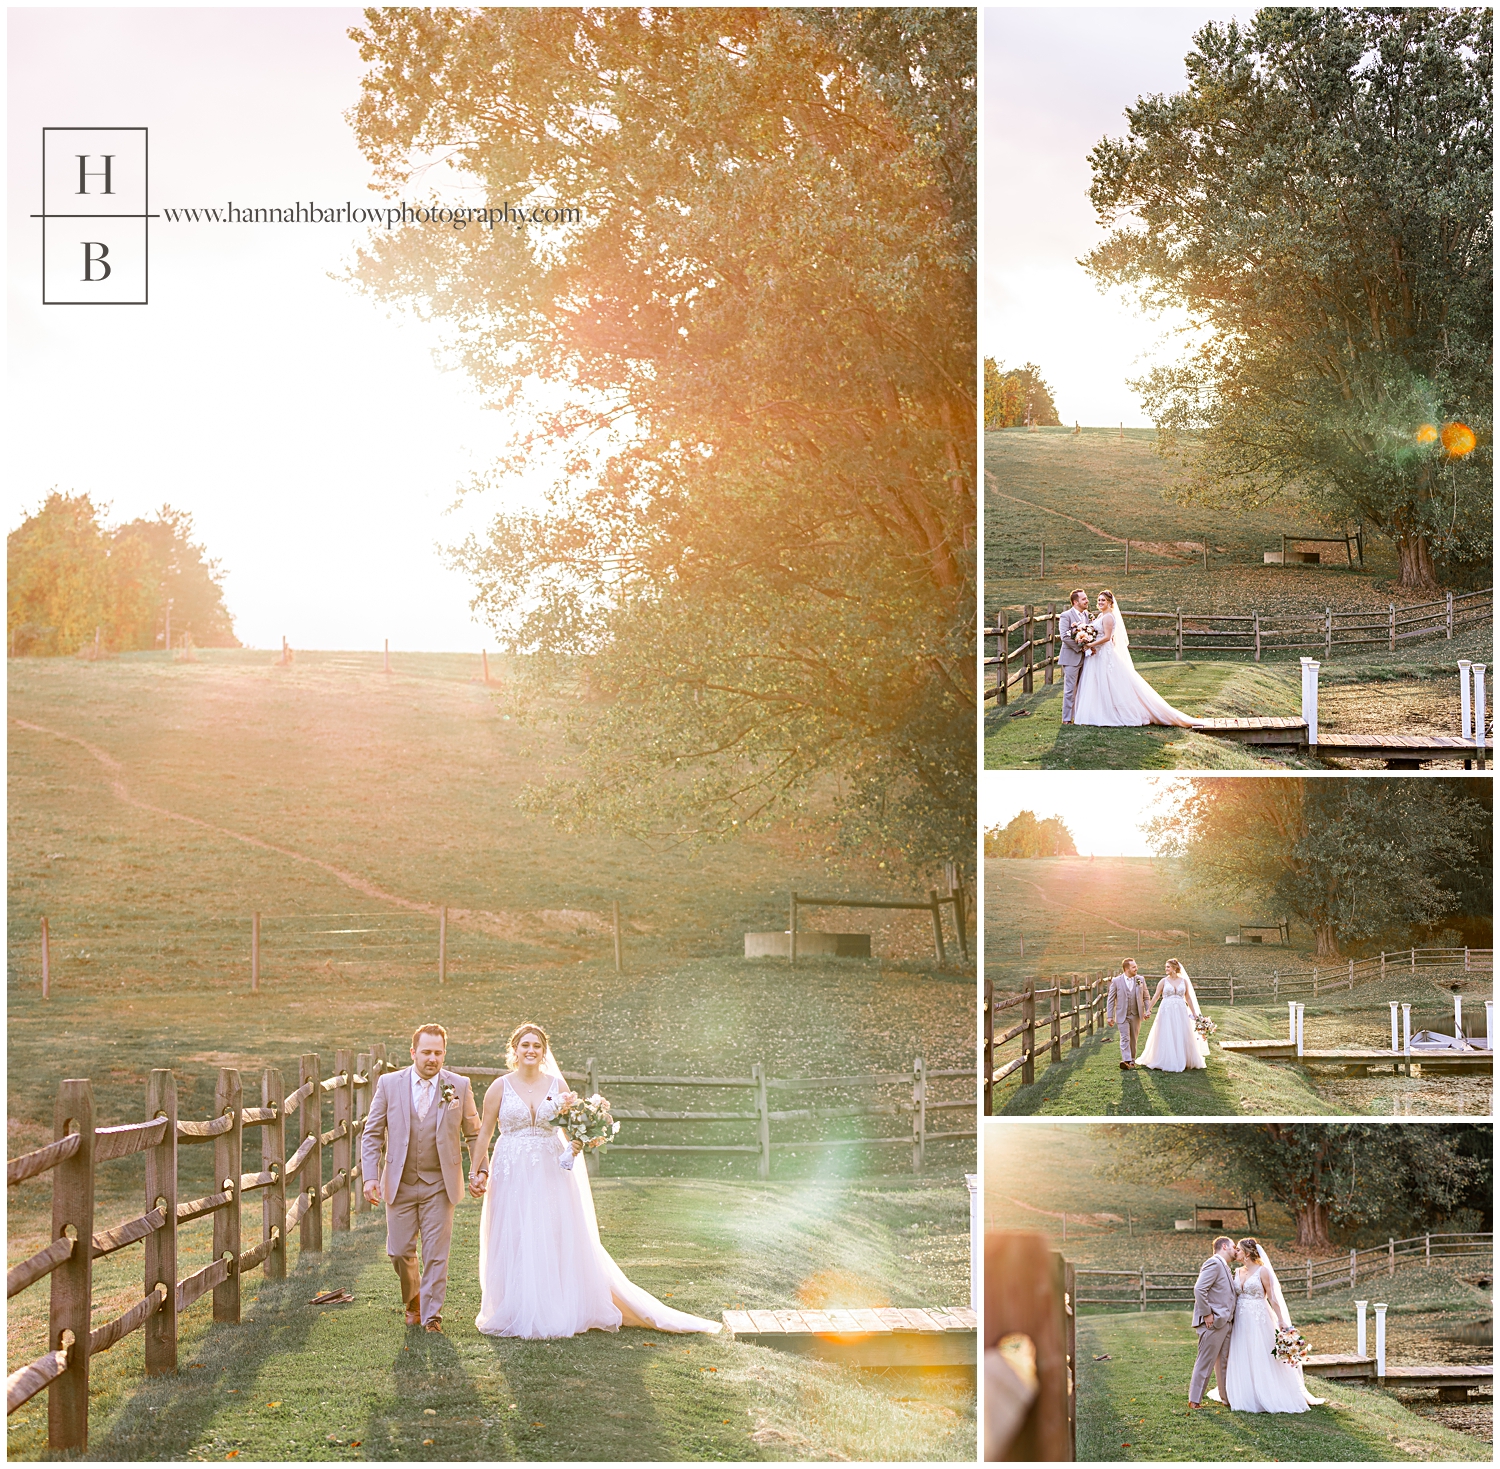 Bride and groom walk toward photographer with intense golden hour light in background.